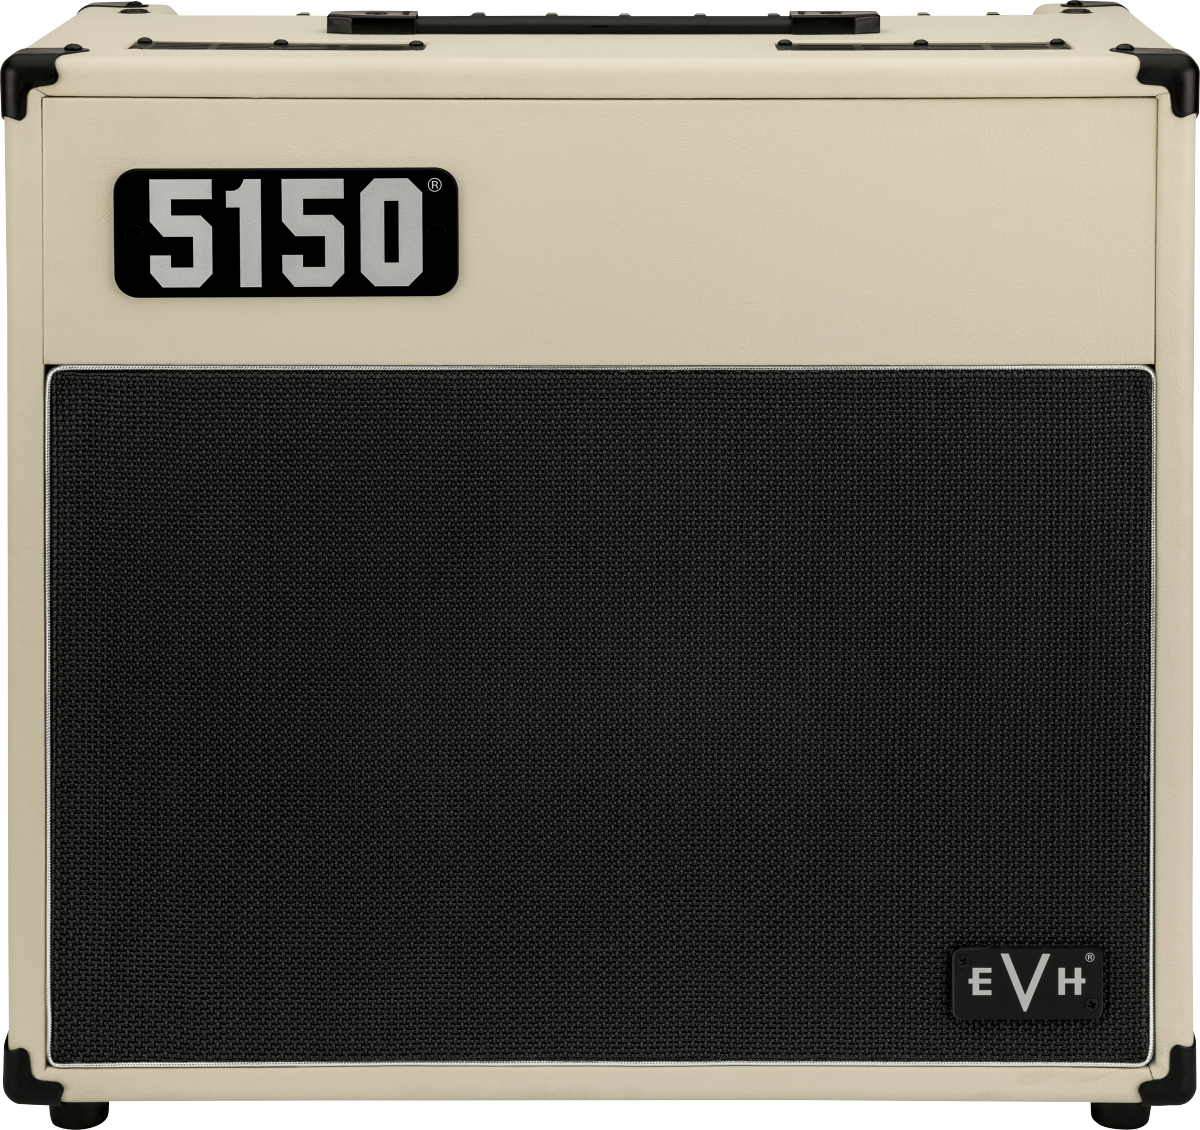 Evh 5150 Iconic Series Combo Ivory 15w 1x10 - Combo amplificador para guitarra eléctrica - Main picture